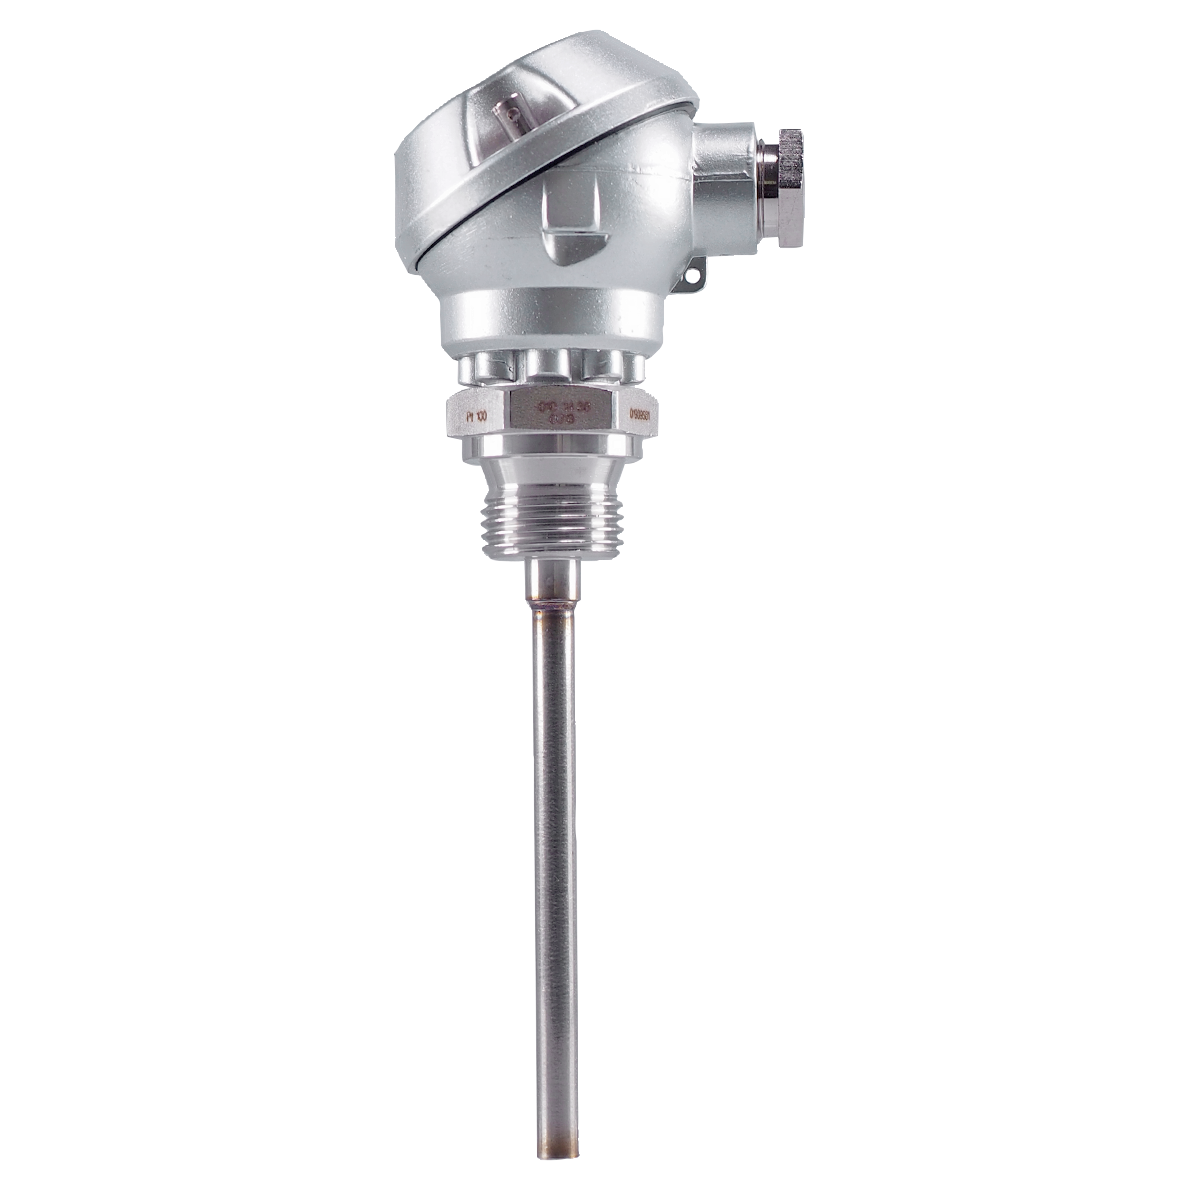 JUMO screw-in resistance thermometer with connection head form J, with stepped protection tube for air measurement (with 1 x Pt to Ø 2.6 mm, with 2 x Pt to Ø 3.5 mm)